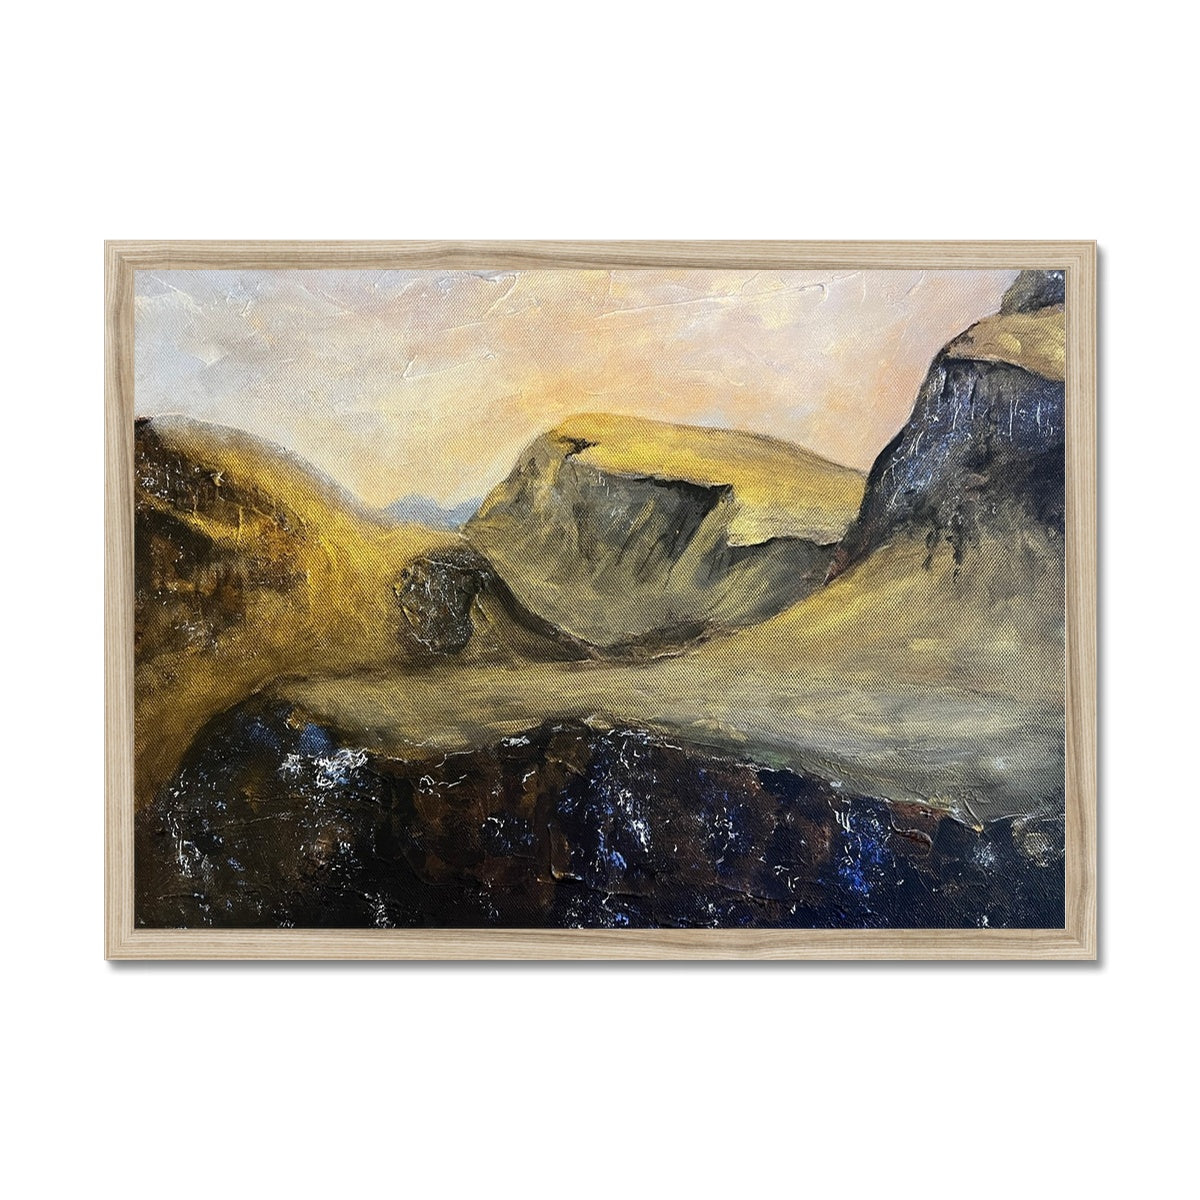 The Quiraing Skye Painting | Framed Prints From Scotland-Framed Prints-Skye Art Gallery-A2 Landscape-Natural Frame-Paintings, Prints, Homeware, Art Gifts From Scotland By Scottish Artist Kevin Hunter